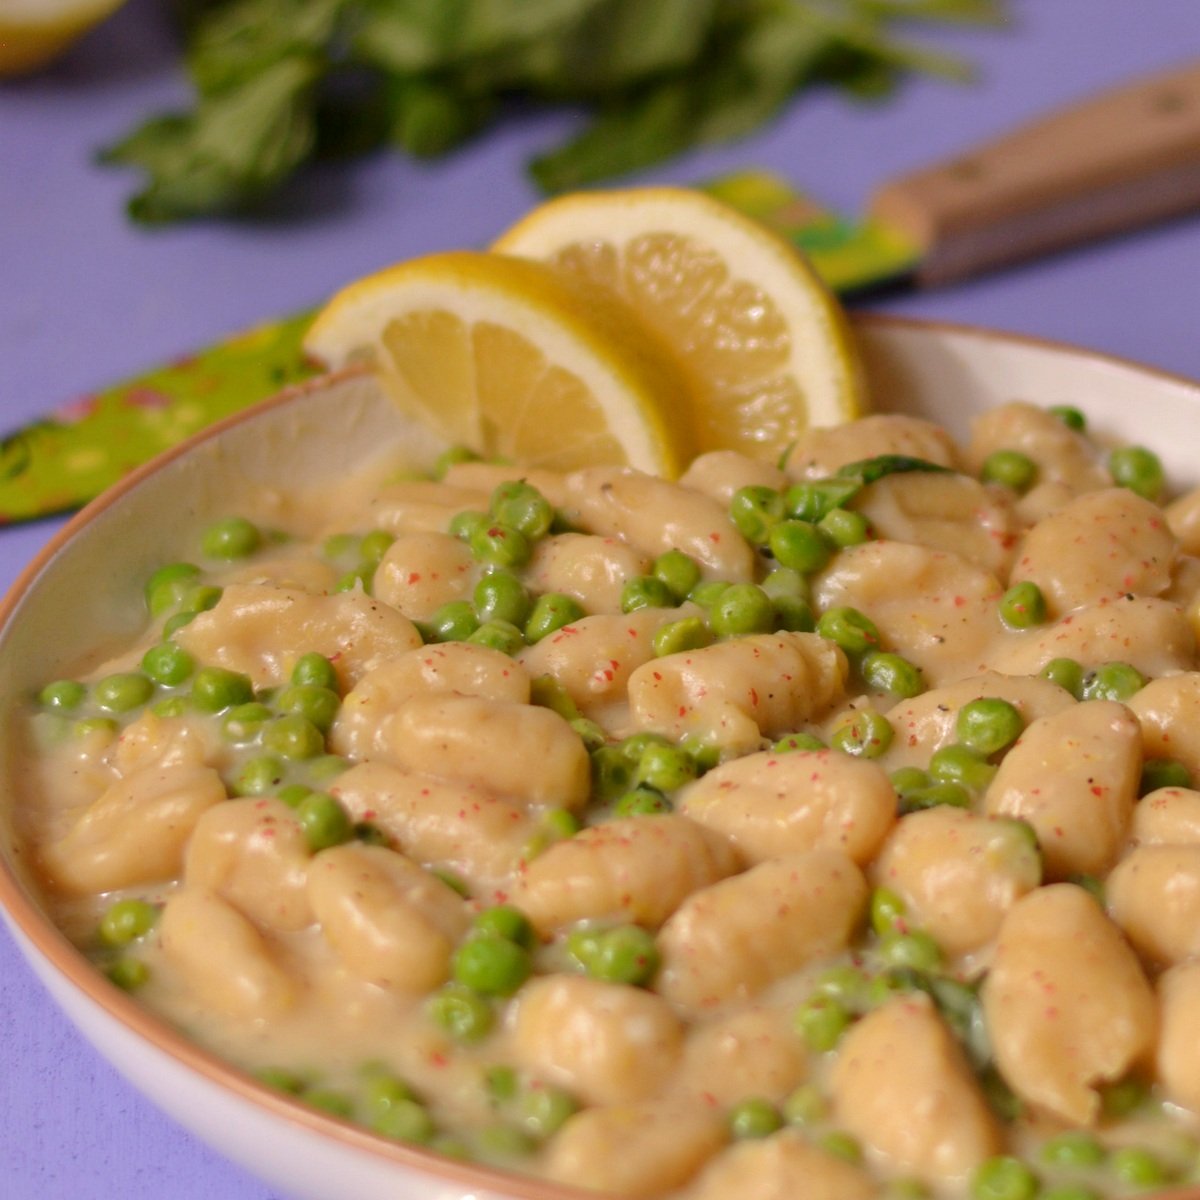 A bowl of gnocchi and peas with slices of lemon.